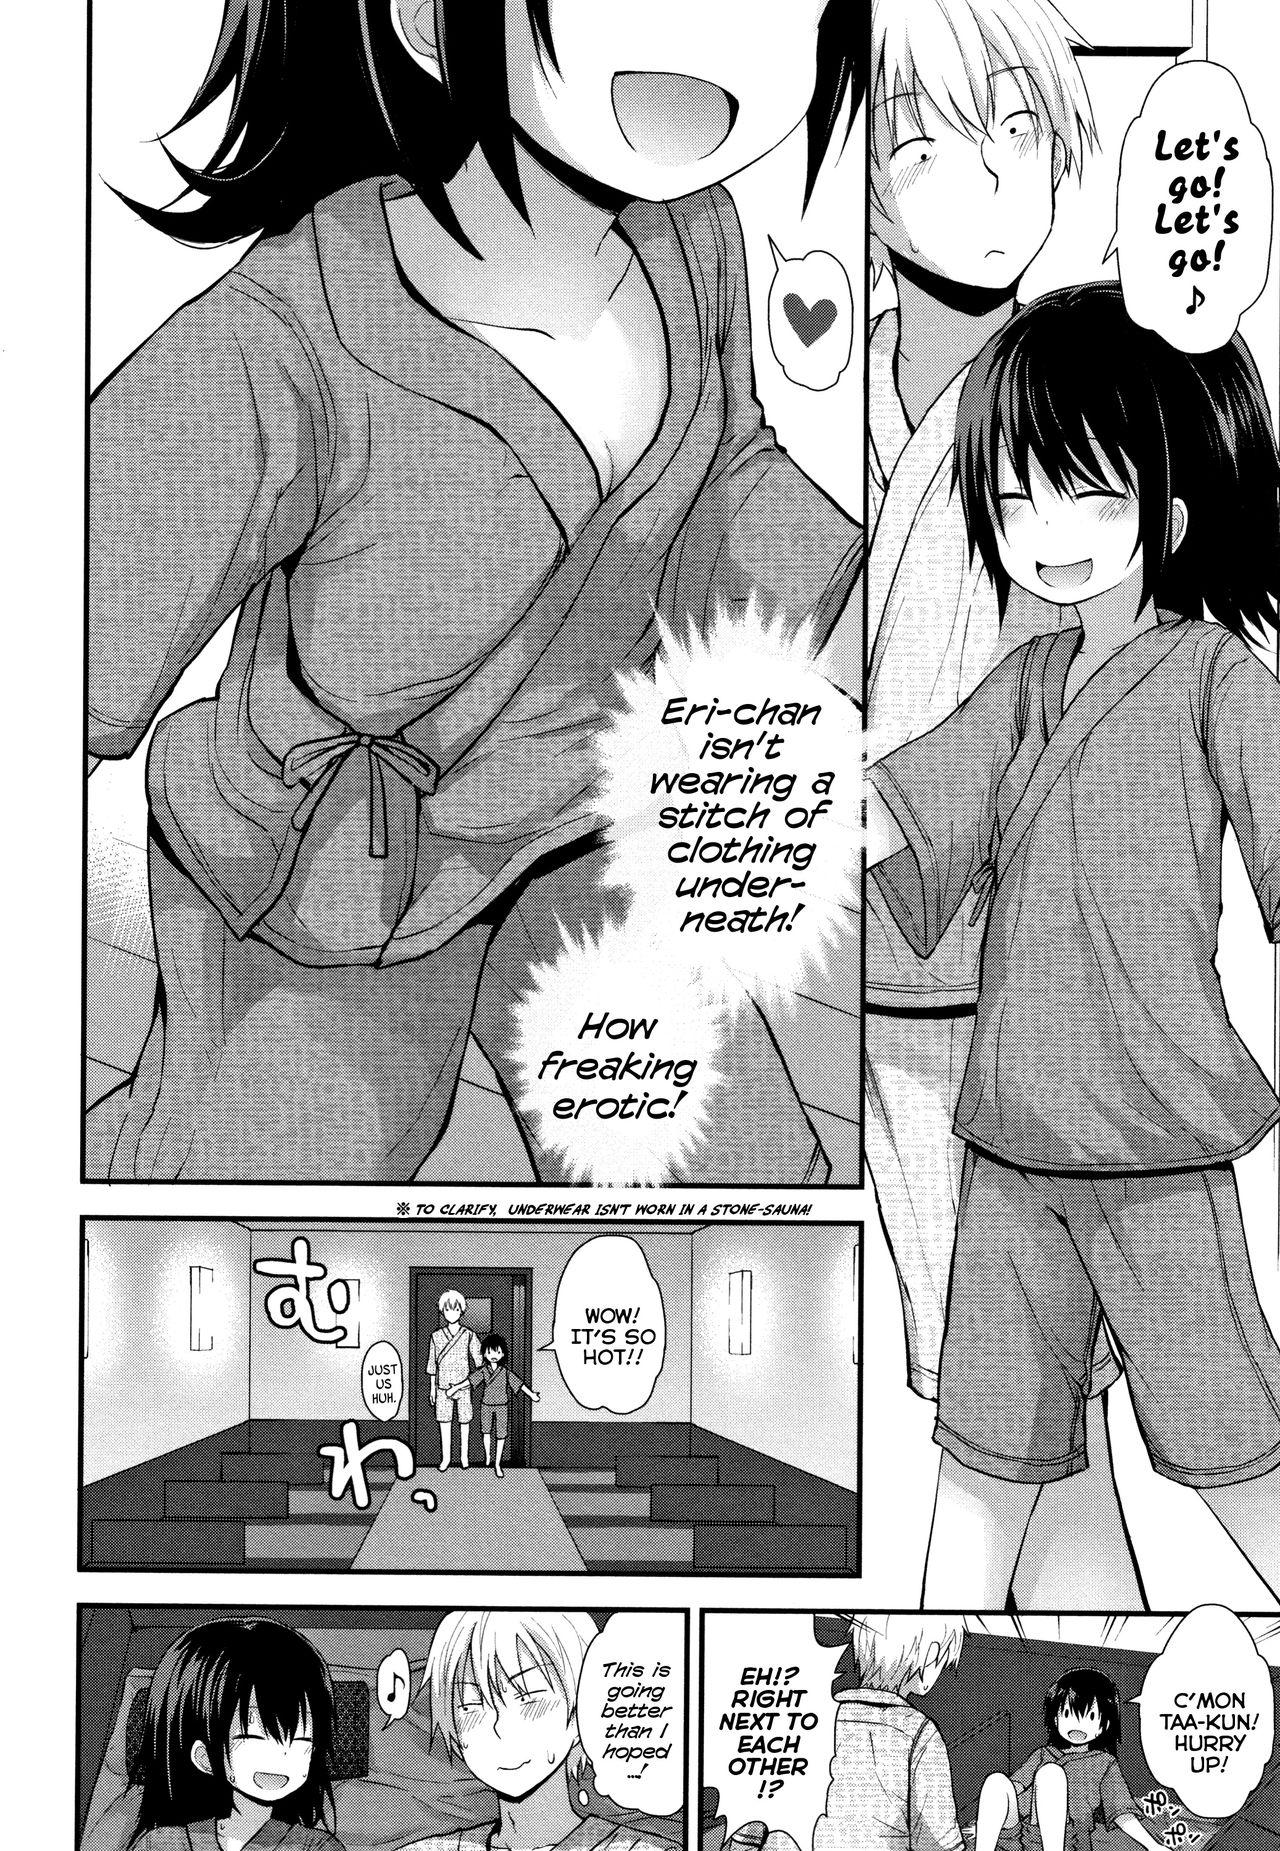 Hermana Renkyuu wa Tokyo Date | Extended-Holiday Tokyo Date The - Page 3